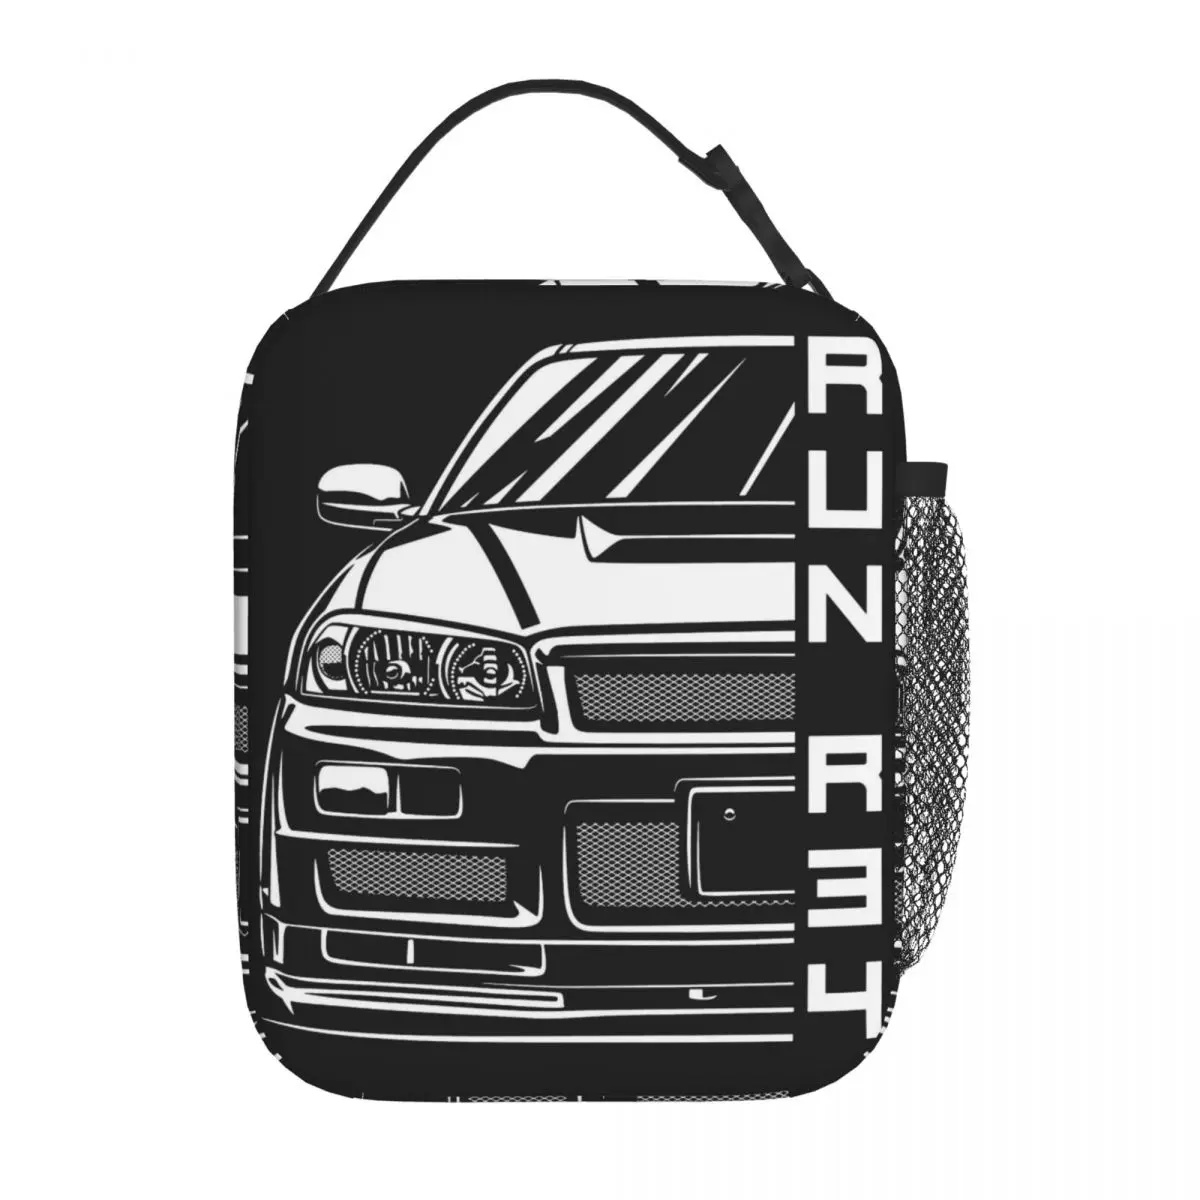 

GTR R34 Skyline Jdm Car Merch Insulated Lunch Bag School Lunch Container Portable Unique Design Cooler Thermal Lunch Box